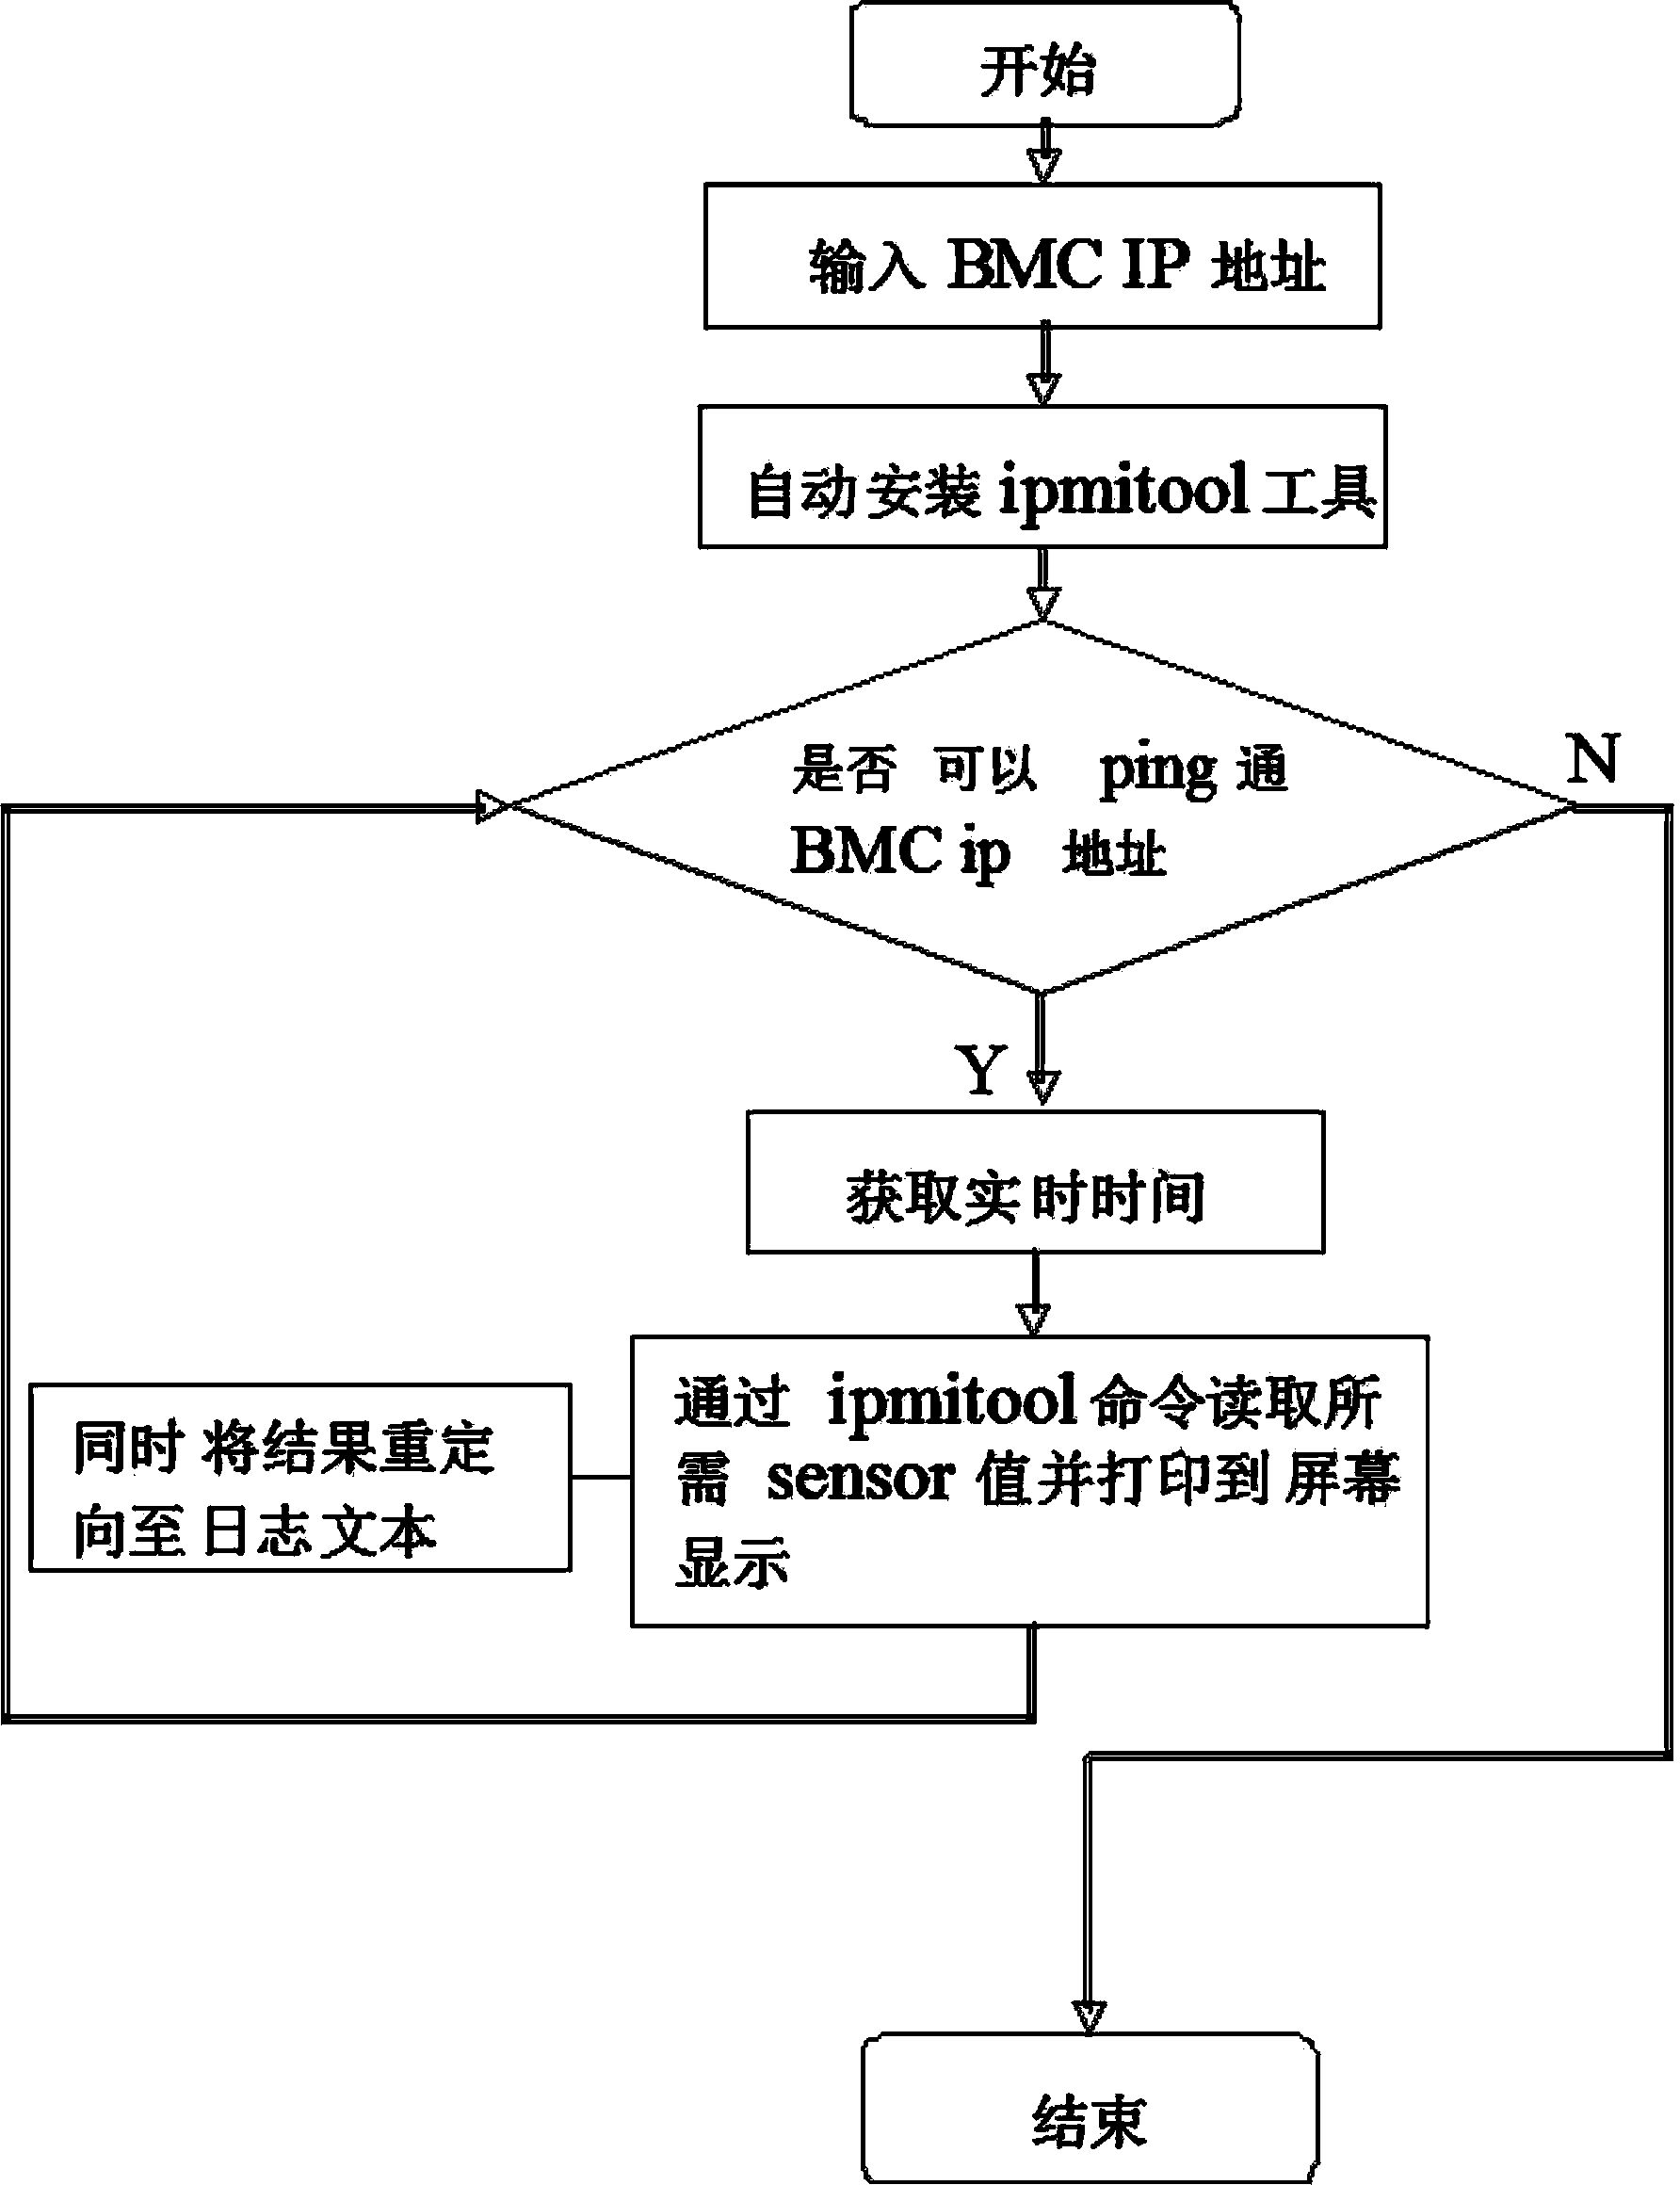 Method for automatically monitoring BMC working state based on ipmitool